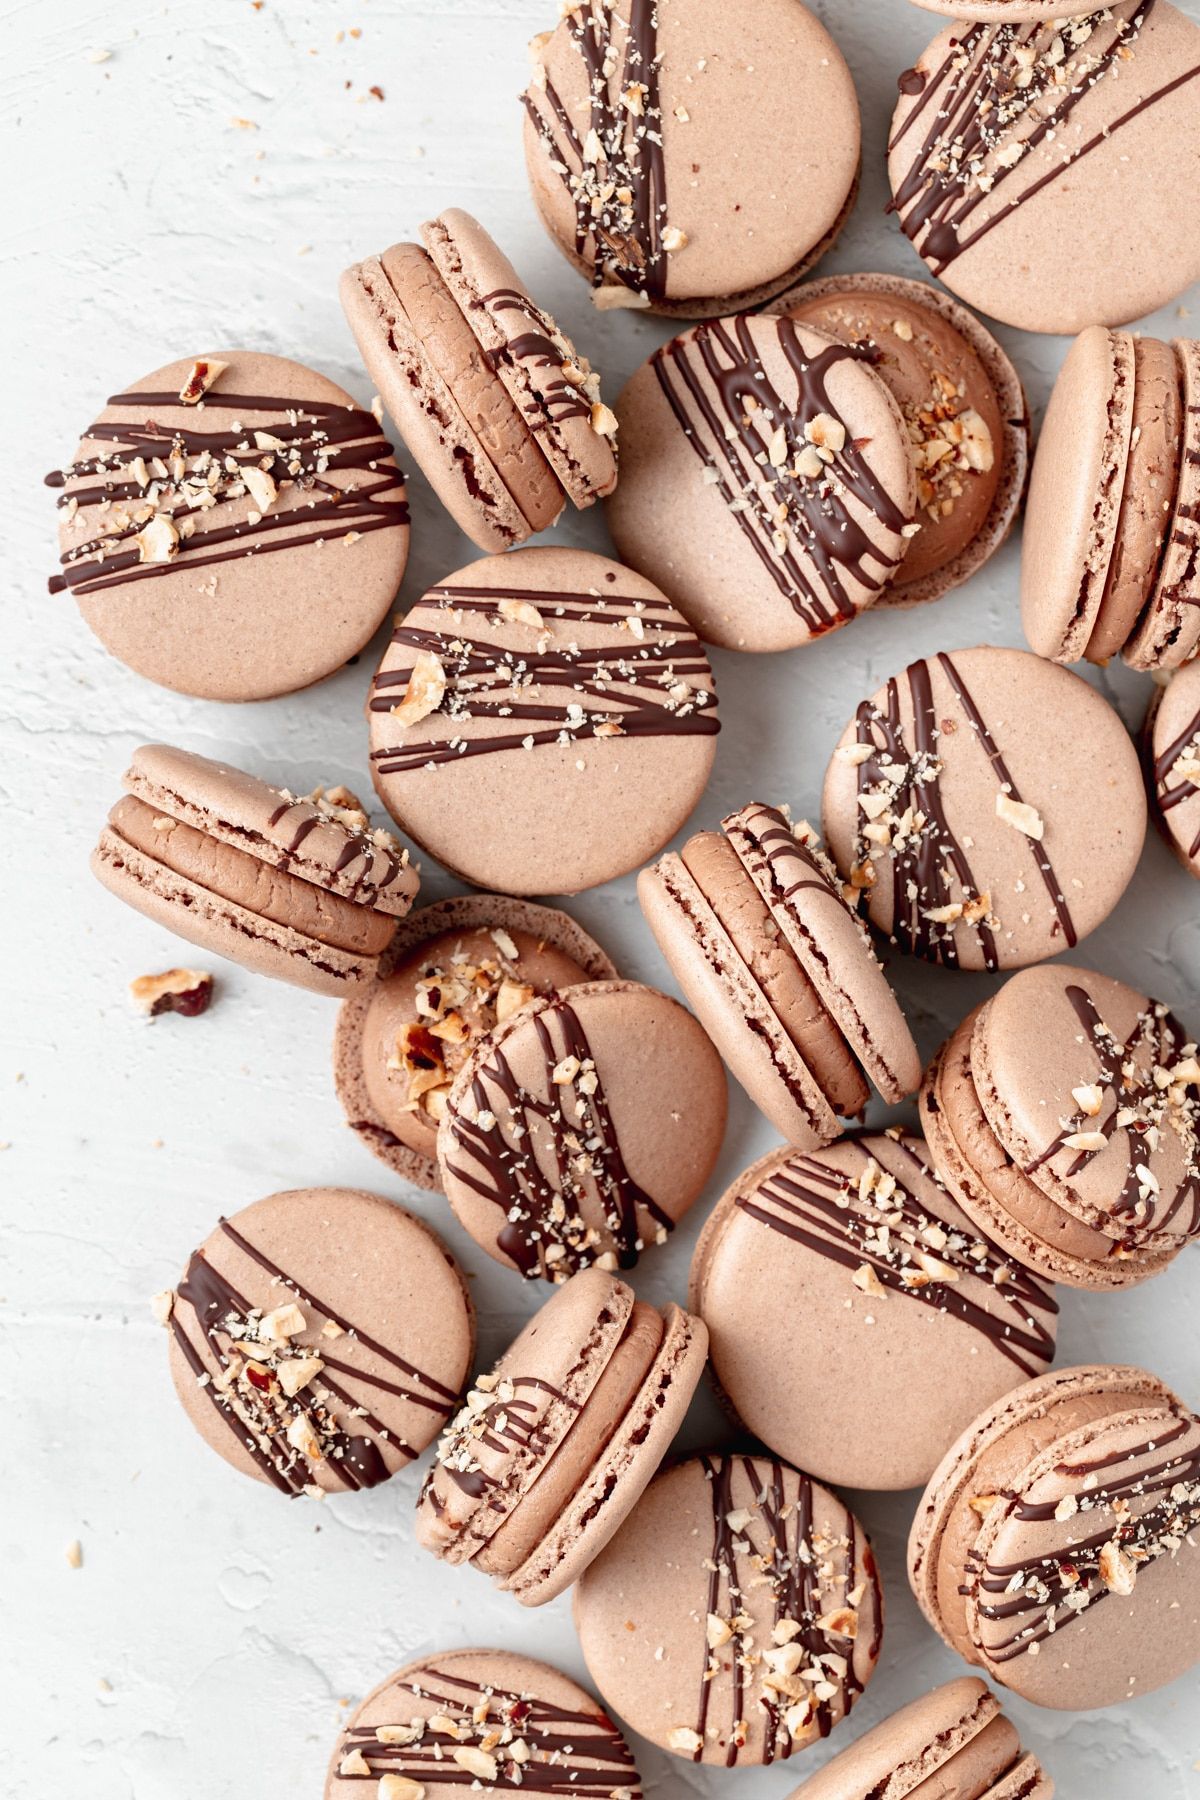 Chocolate macarons with chocolate and caramel drizzle and crushed nuts on a white background - Macarons